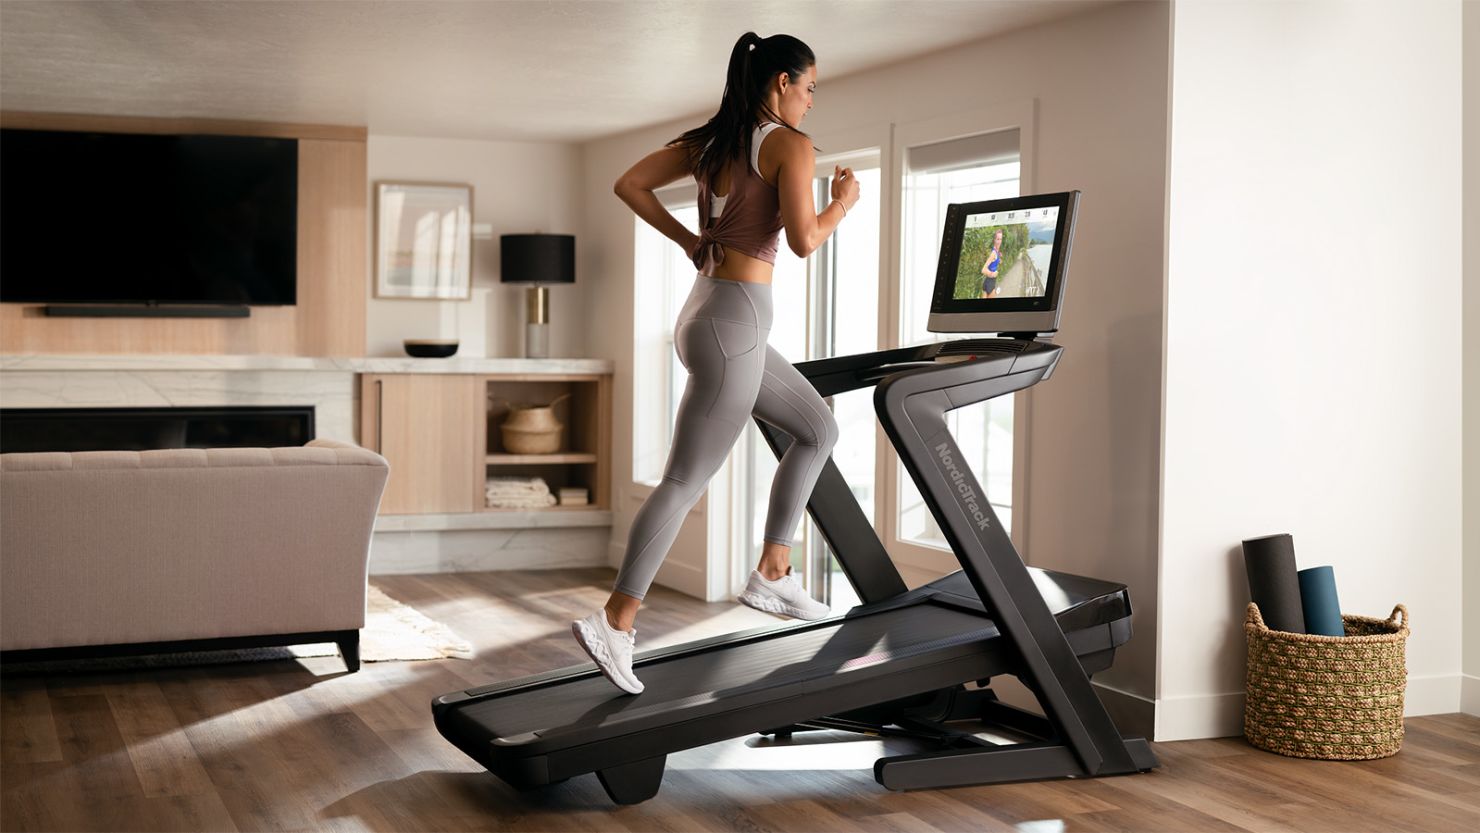 NordicTrack Commercial 2450 Treadmill review